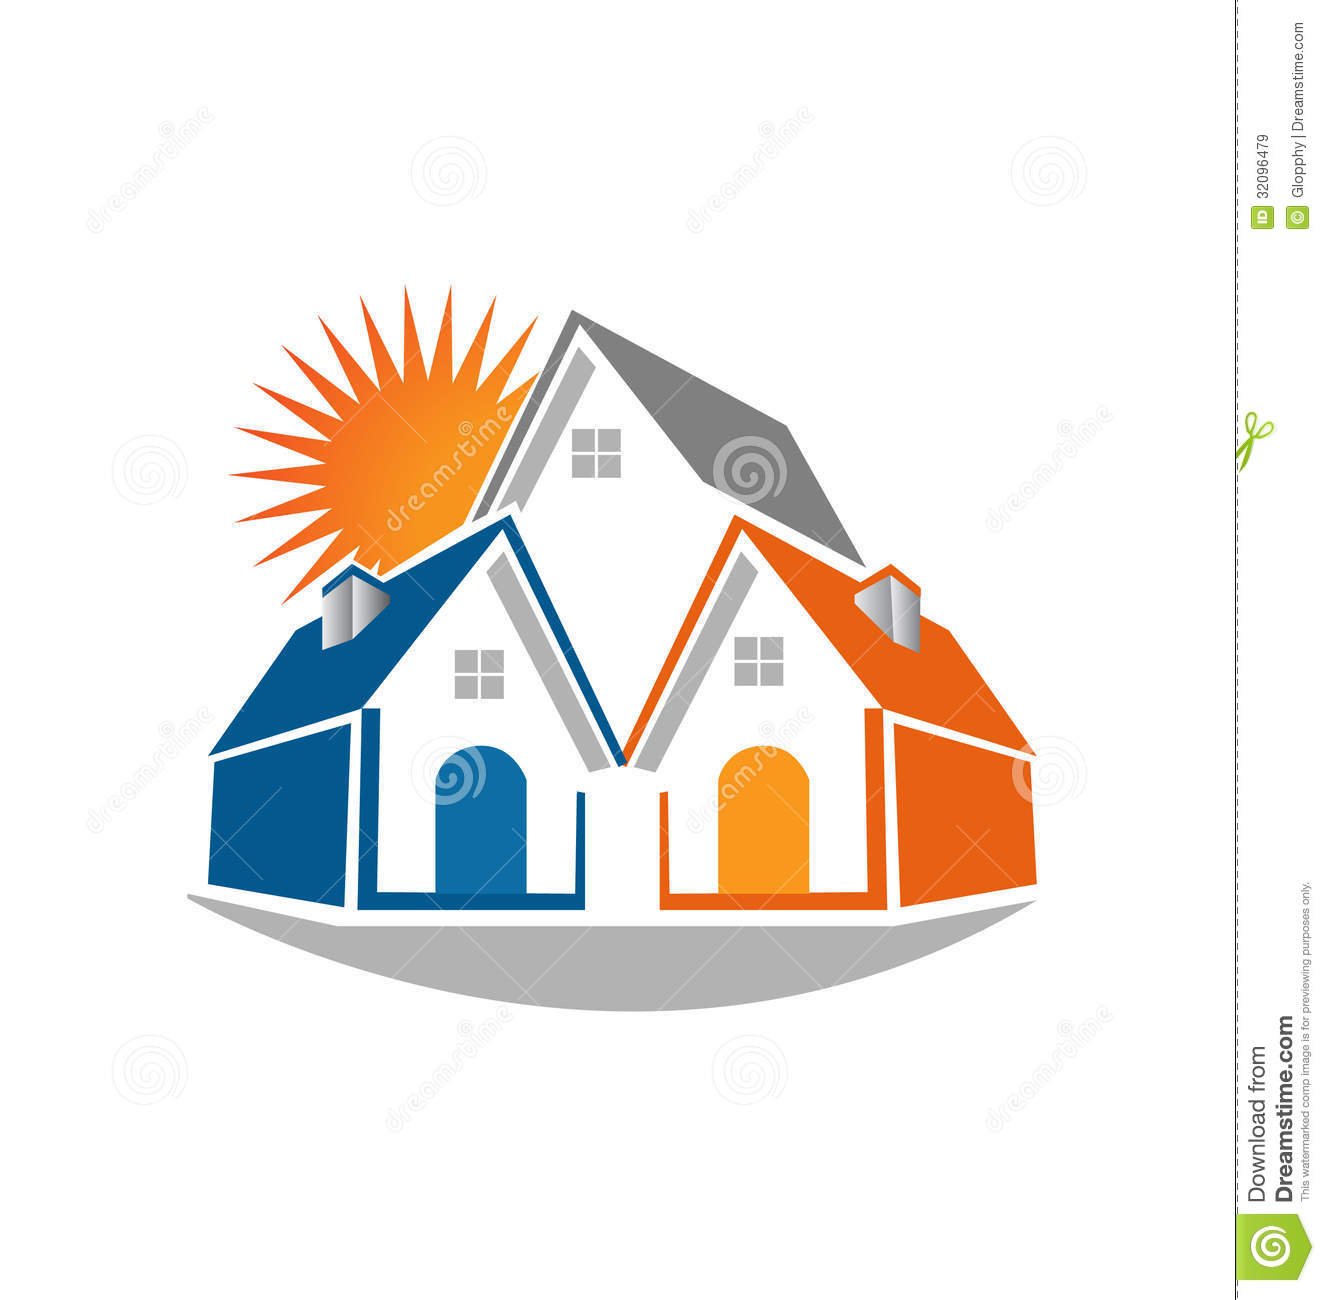 Real Estate Houses And Sun Logo Royalty Free Stock Images   Image